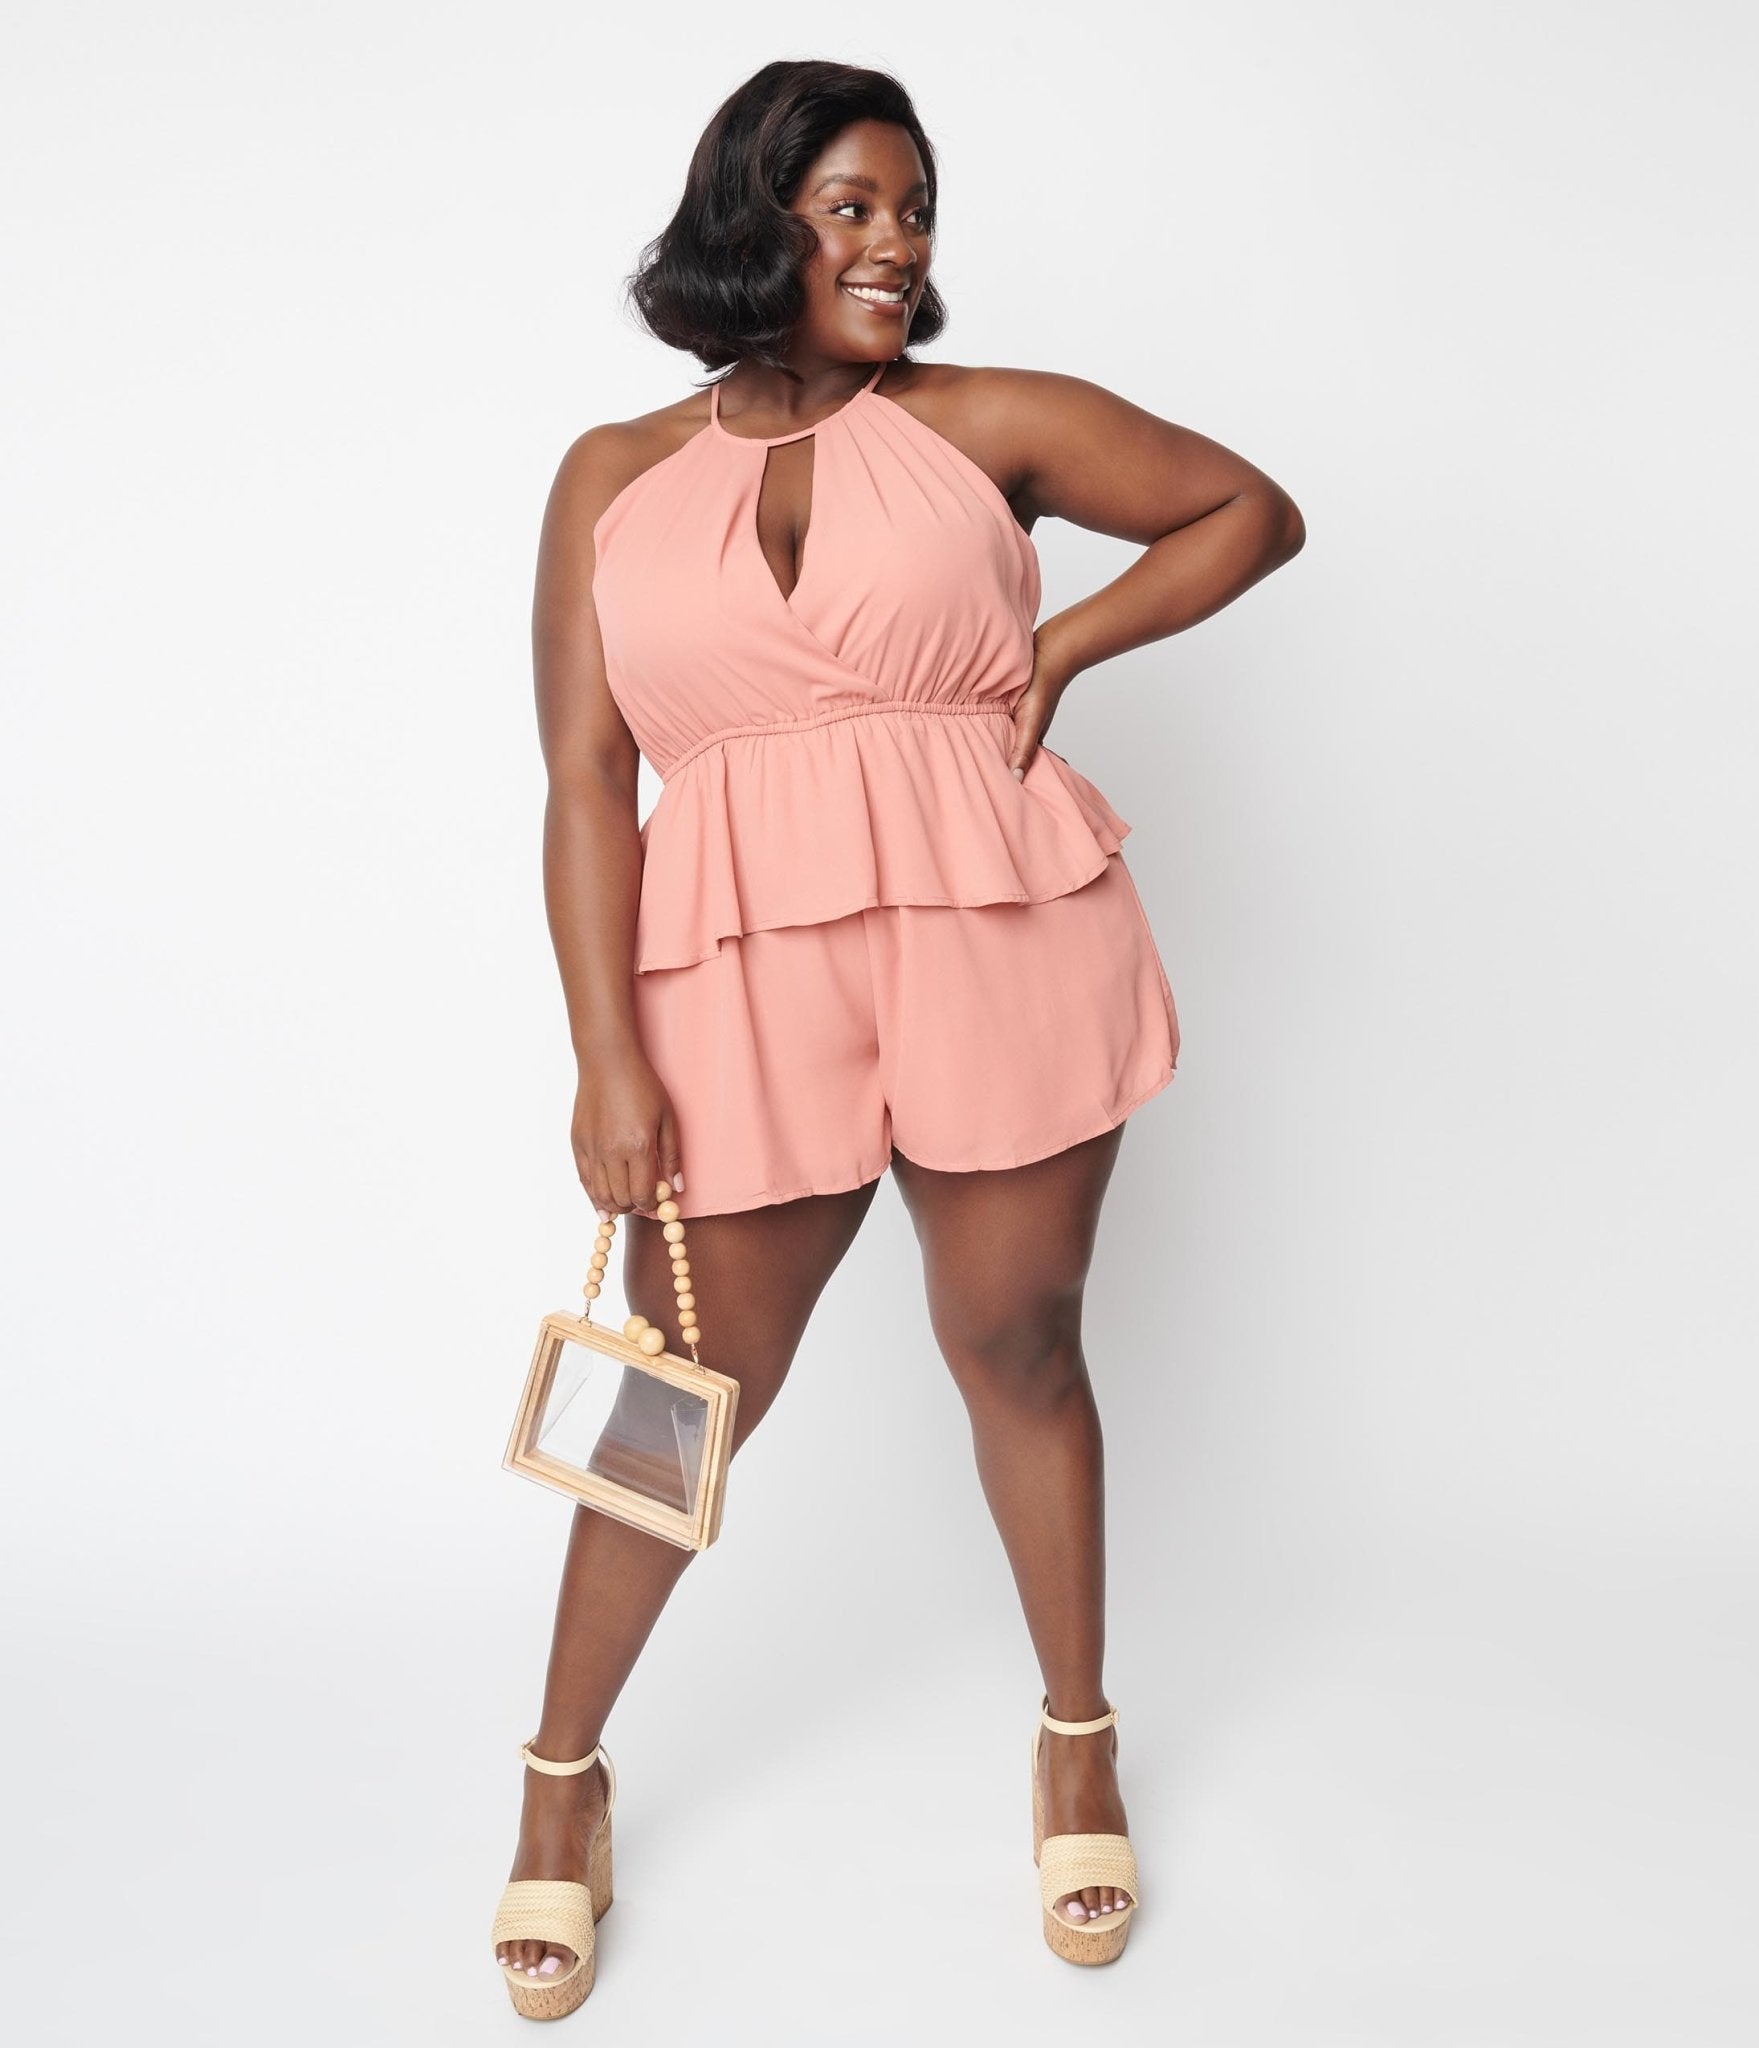 Plus Size Pink Ruffle Romper - Unique Vintage - Womens, BOTTOMS, ROMPERS AND JUMPSUITS